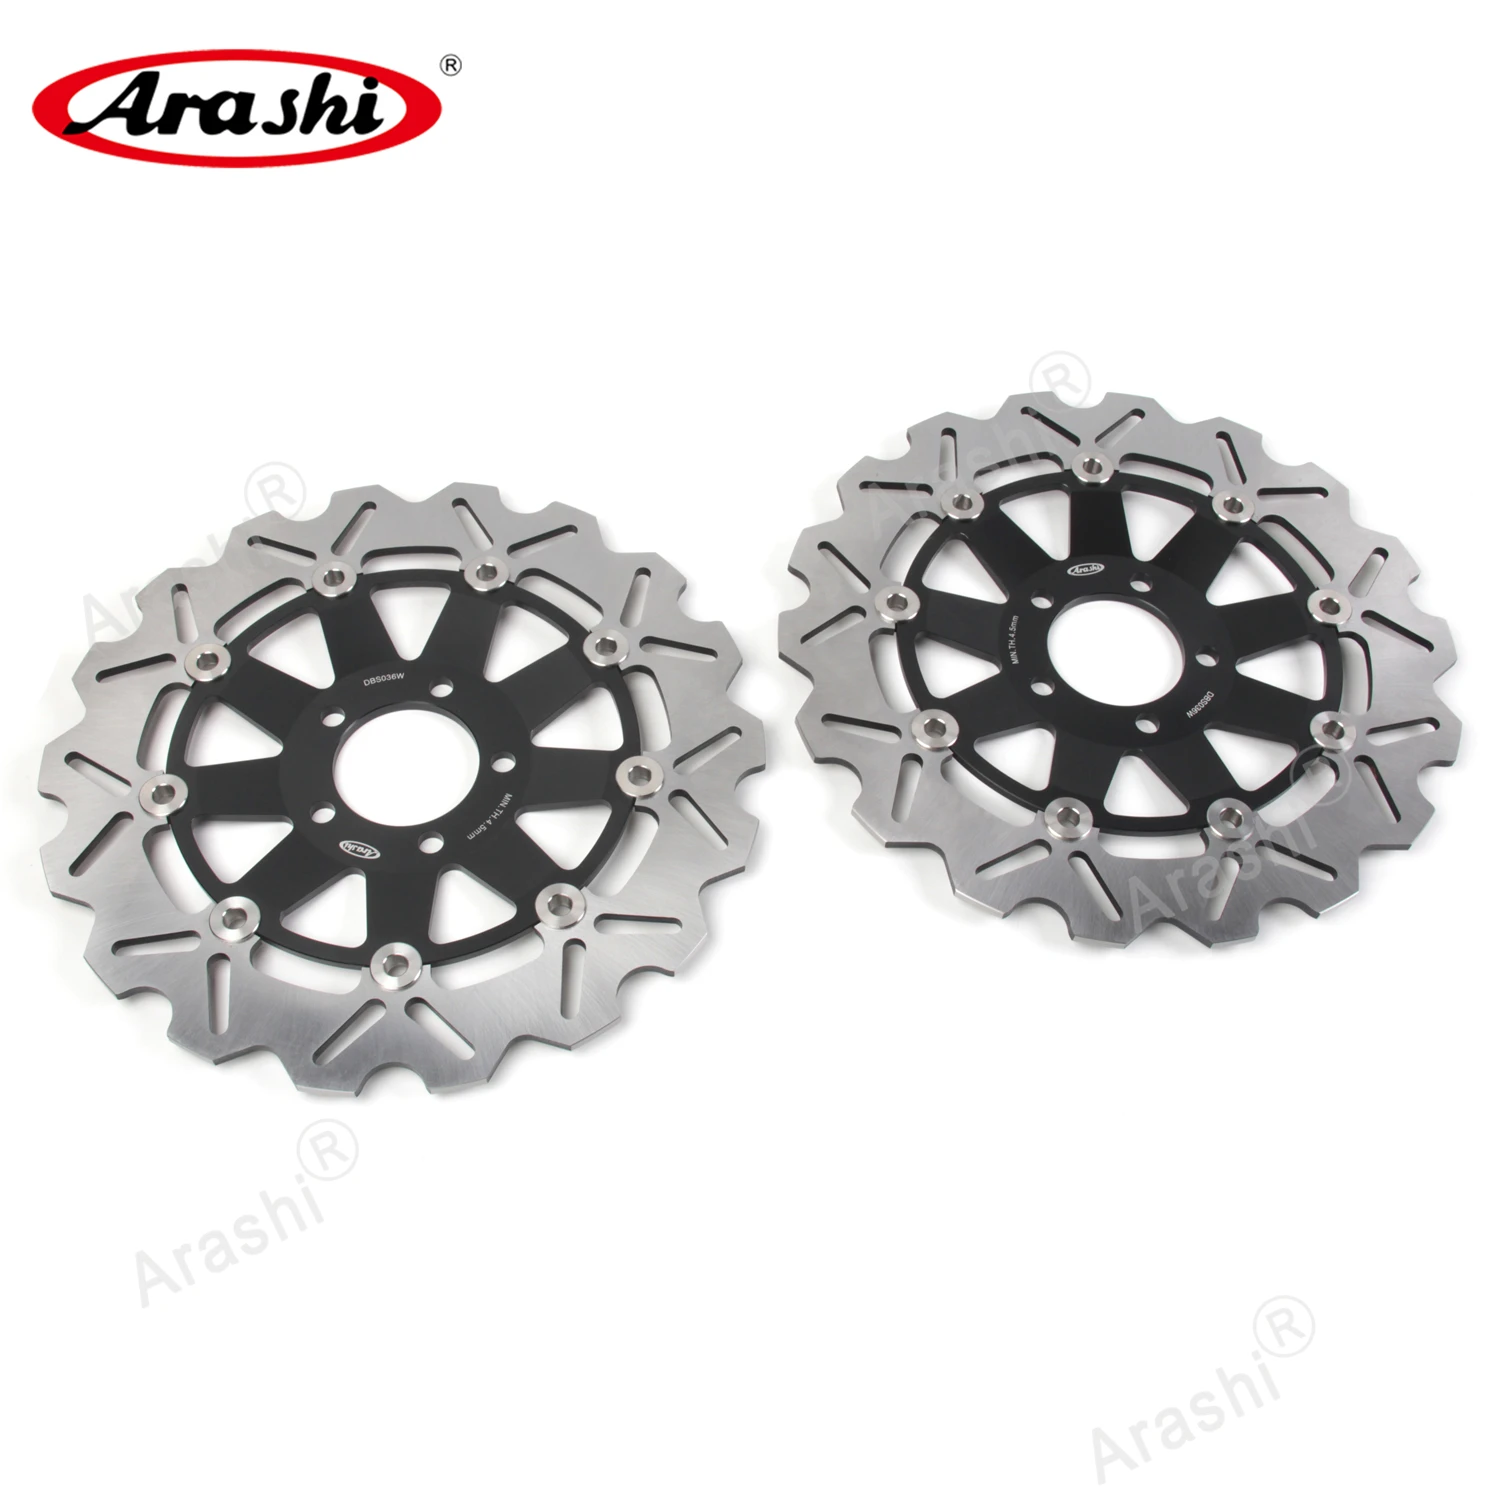 Arashi Front Brake Disc Rotors for Kawasaki ZXR400 1989 1990 ZEPHYR 550 1993-2001 ZEPHYR 750 1991-1999 Motorcycle Replacement Accessories ZXR 400 Gold 1992 1994 1995 1996 1997 1998 2000 